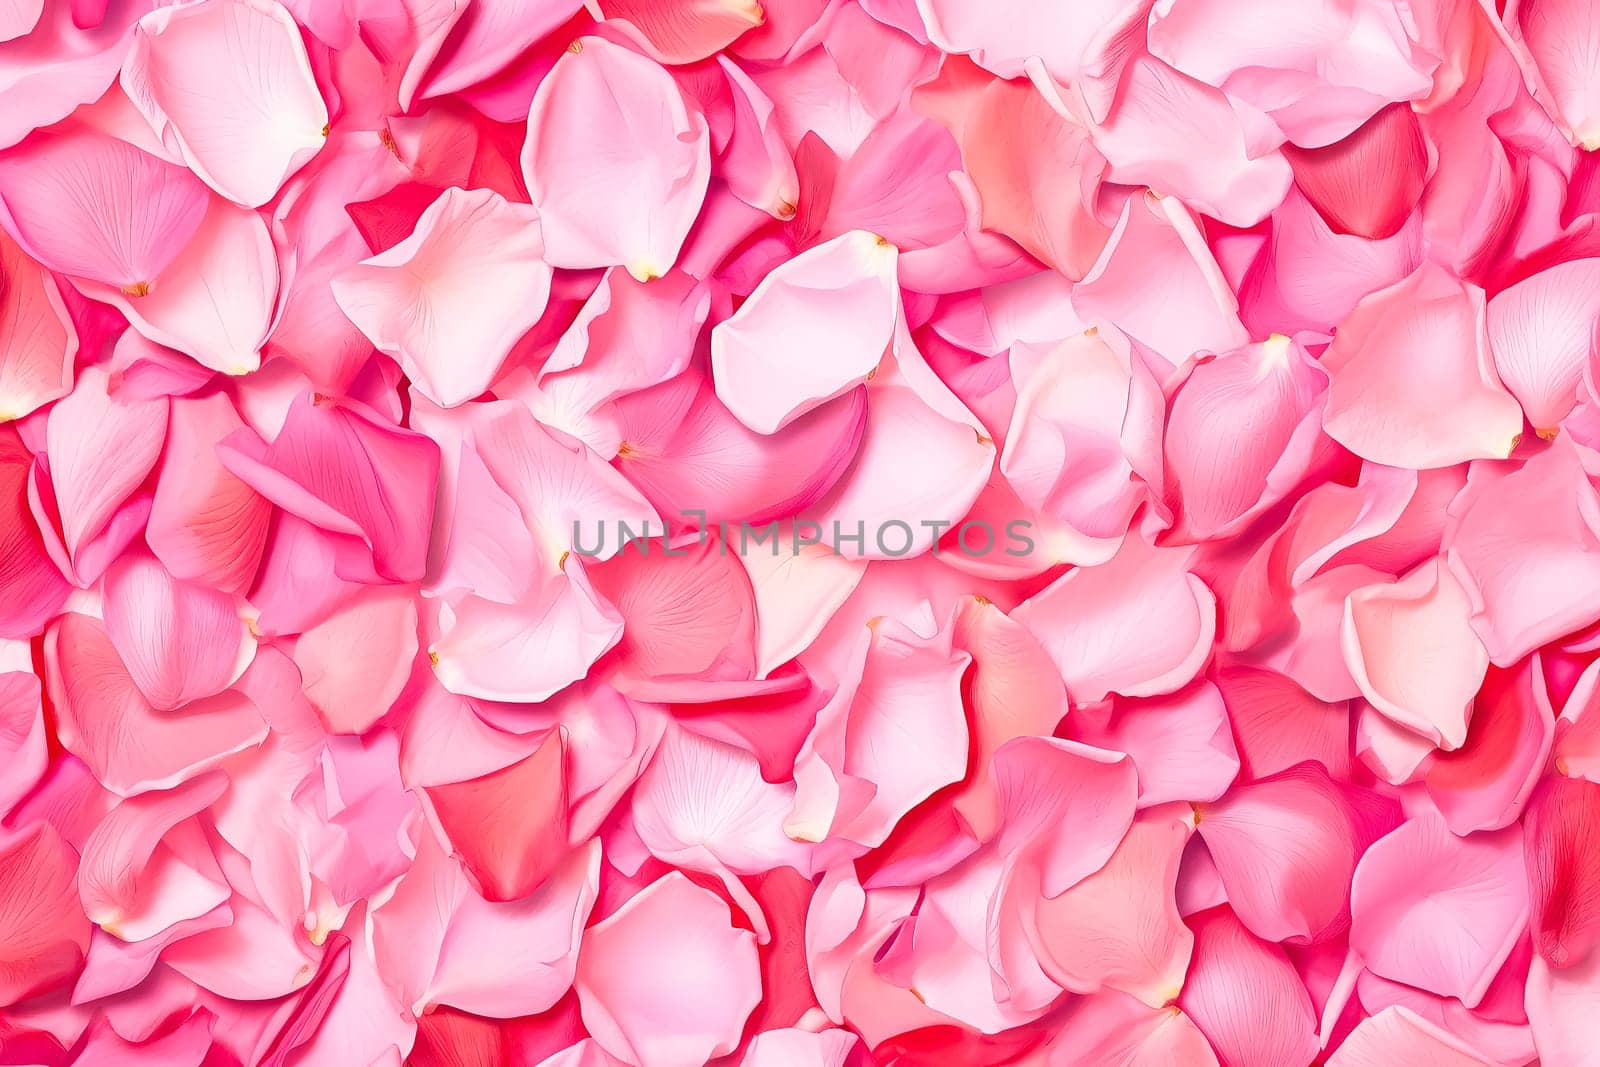 pink rose petals, providing the perfect backdrop for expressing love on Valentines Day by Alla_Morozova93